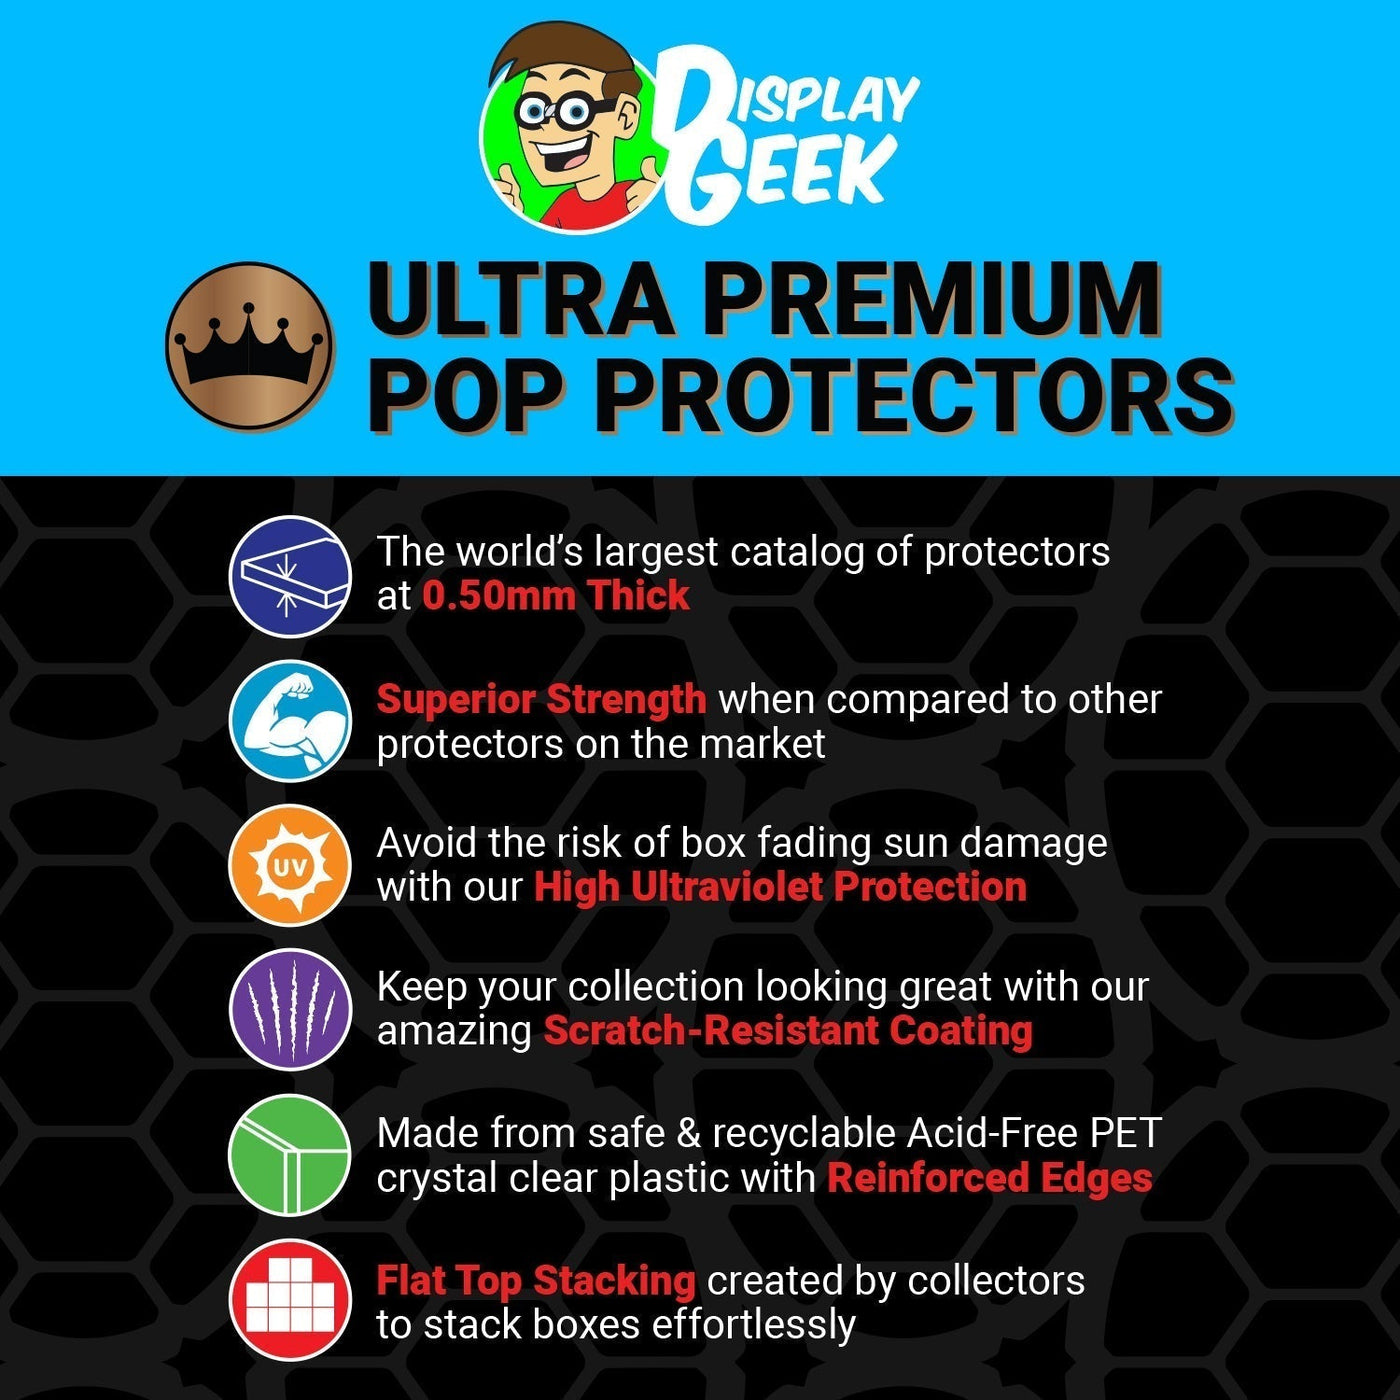 Pop Protector for Aquaman Jim Lee #254 Funko Pop Deluxe on The Protector Guide App by Display Geek